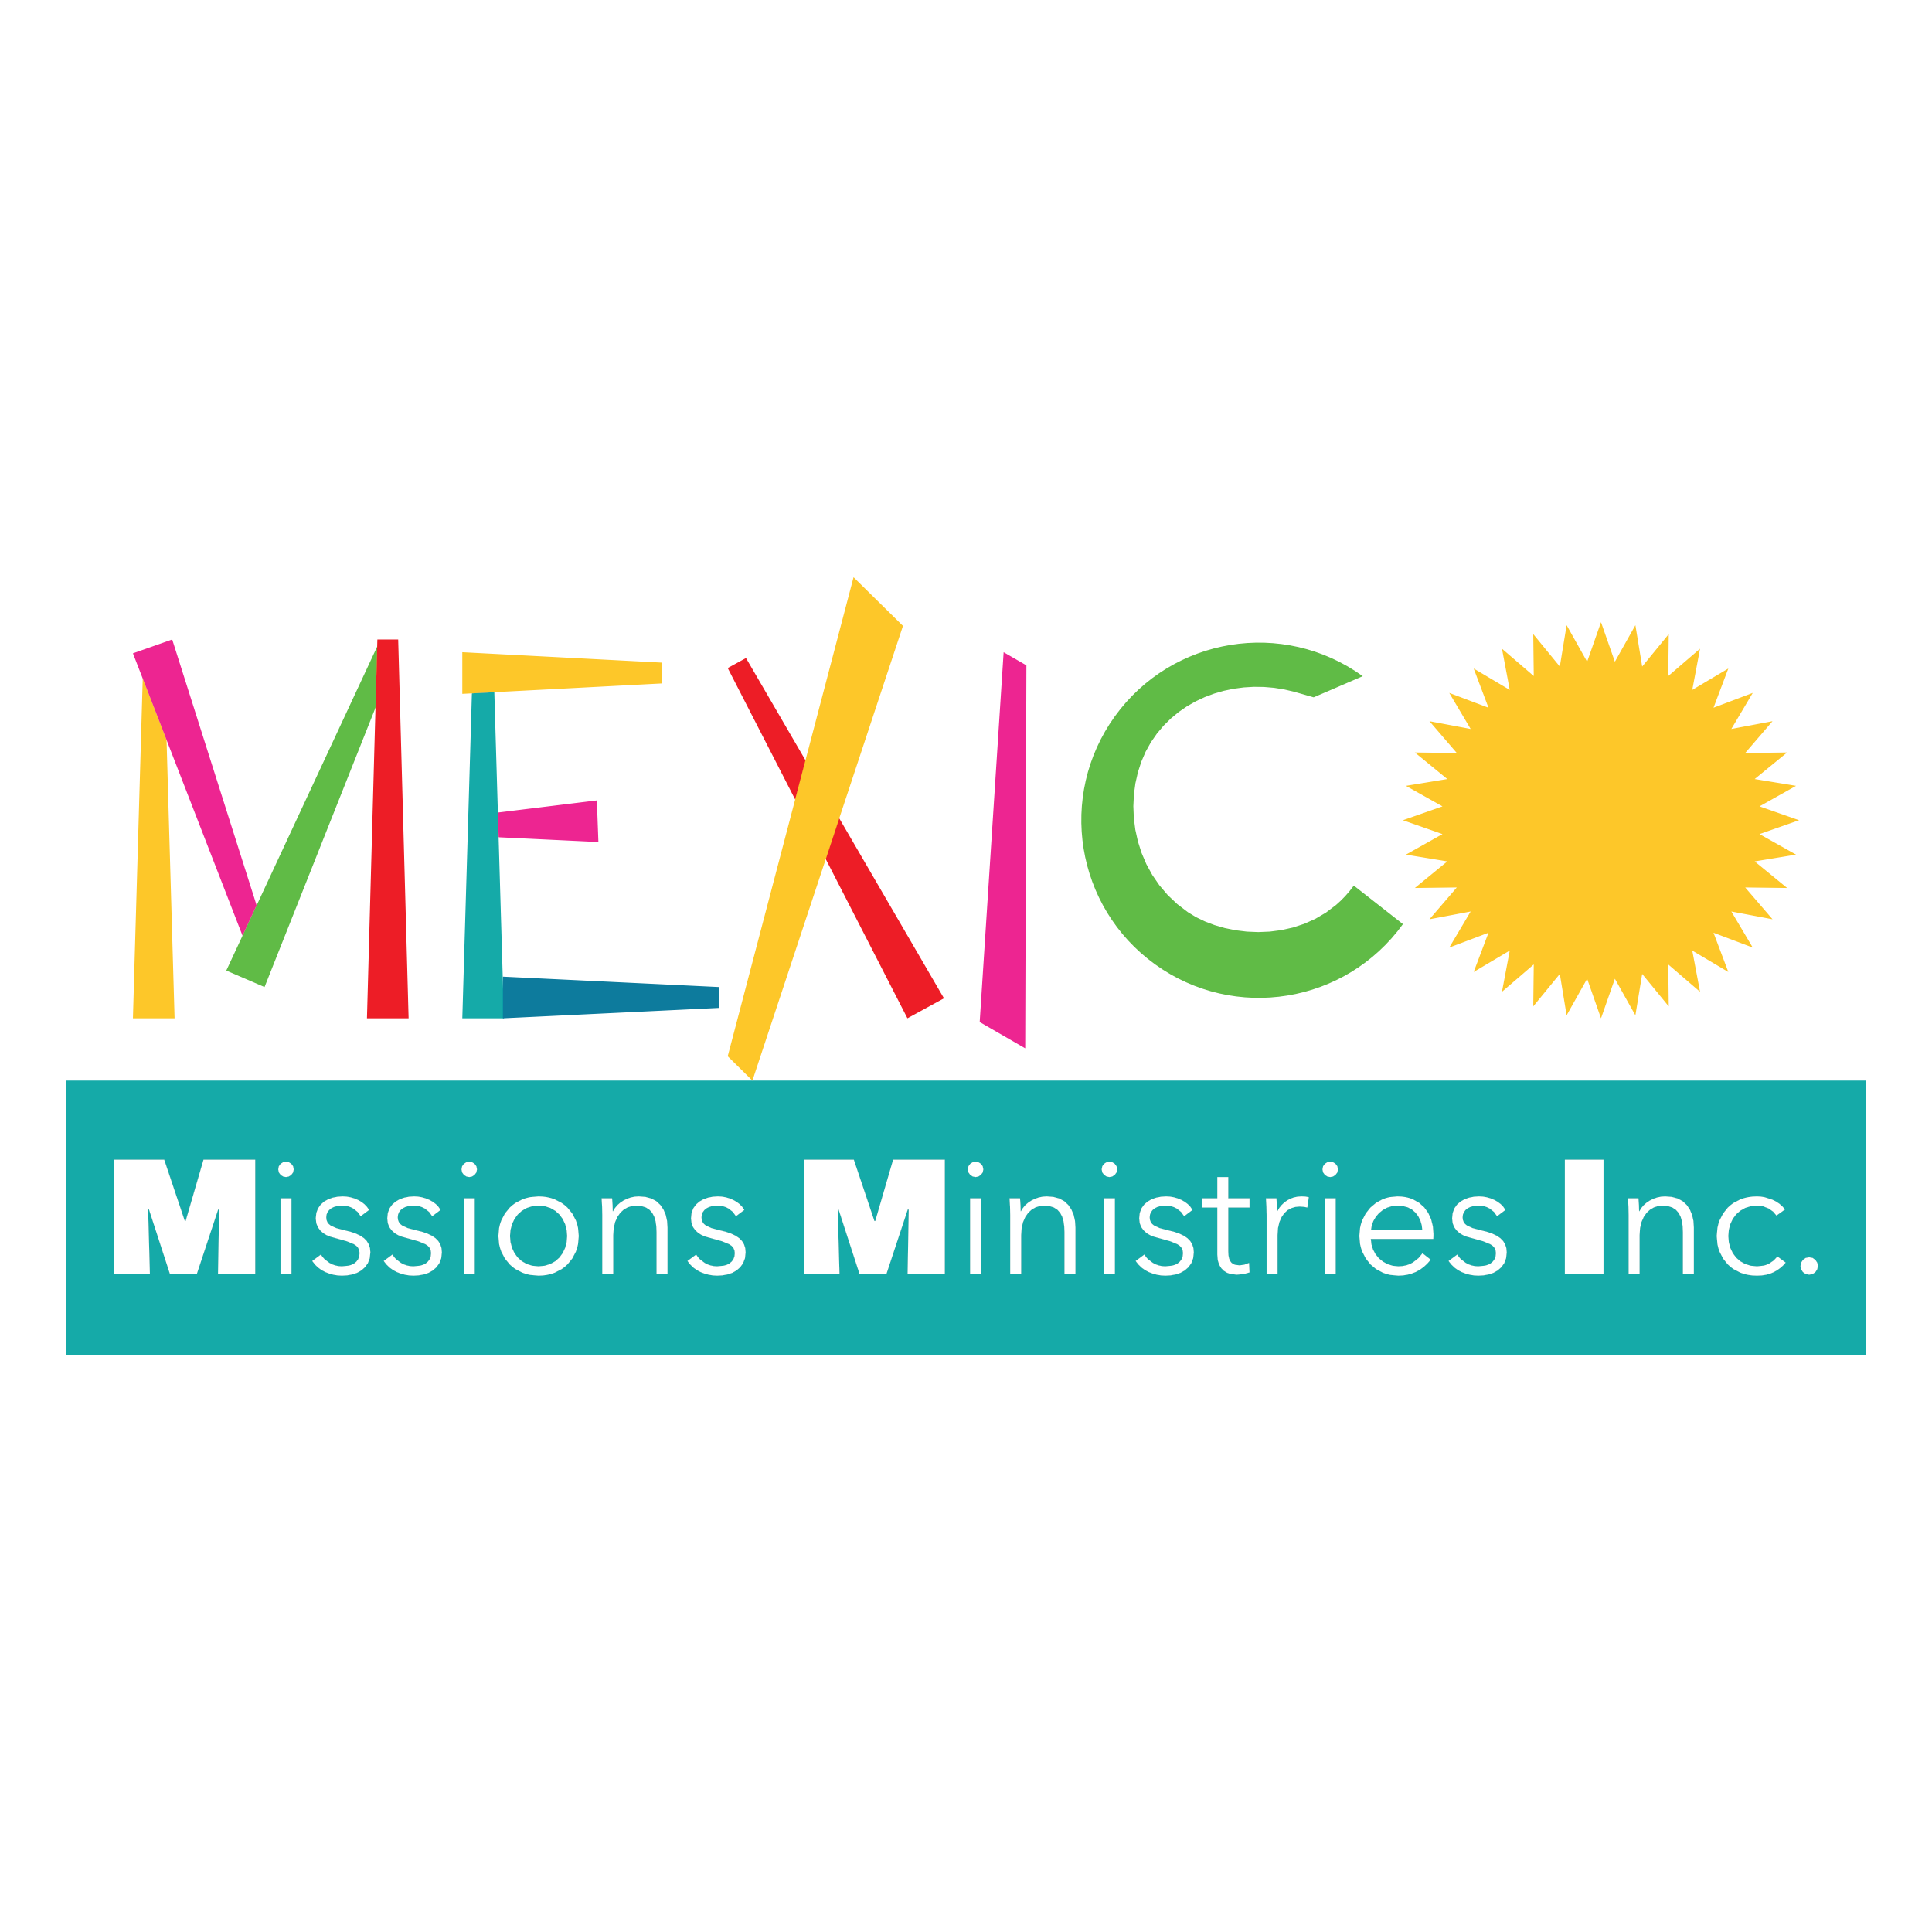 Mexico Missions Ministries Logo